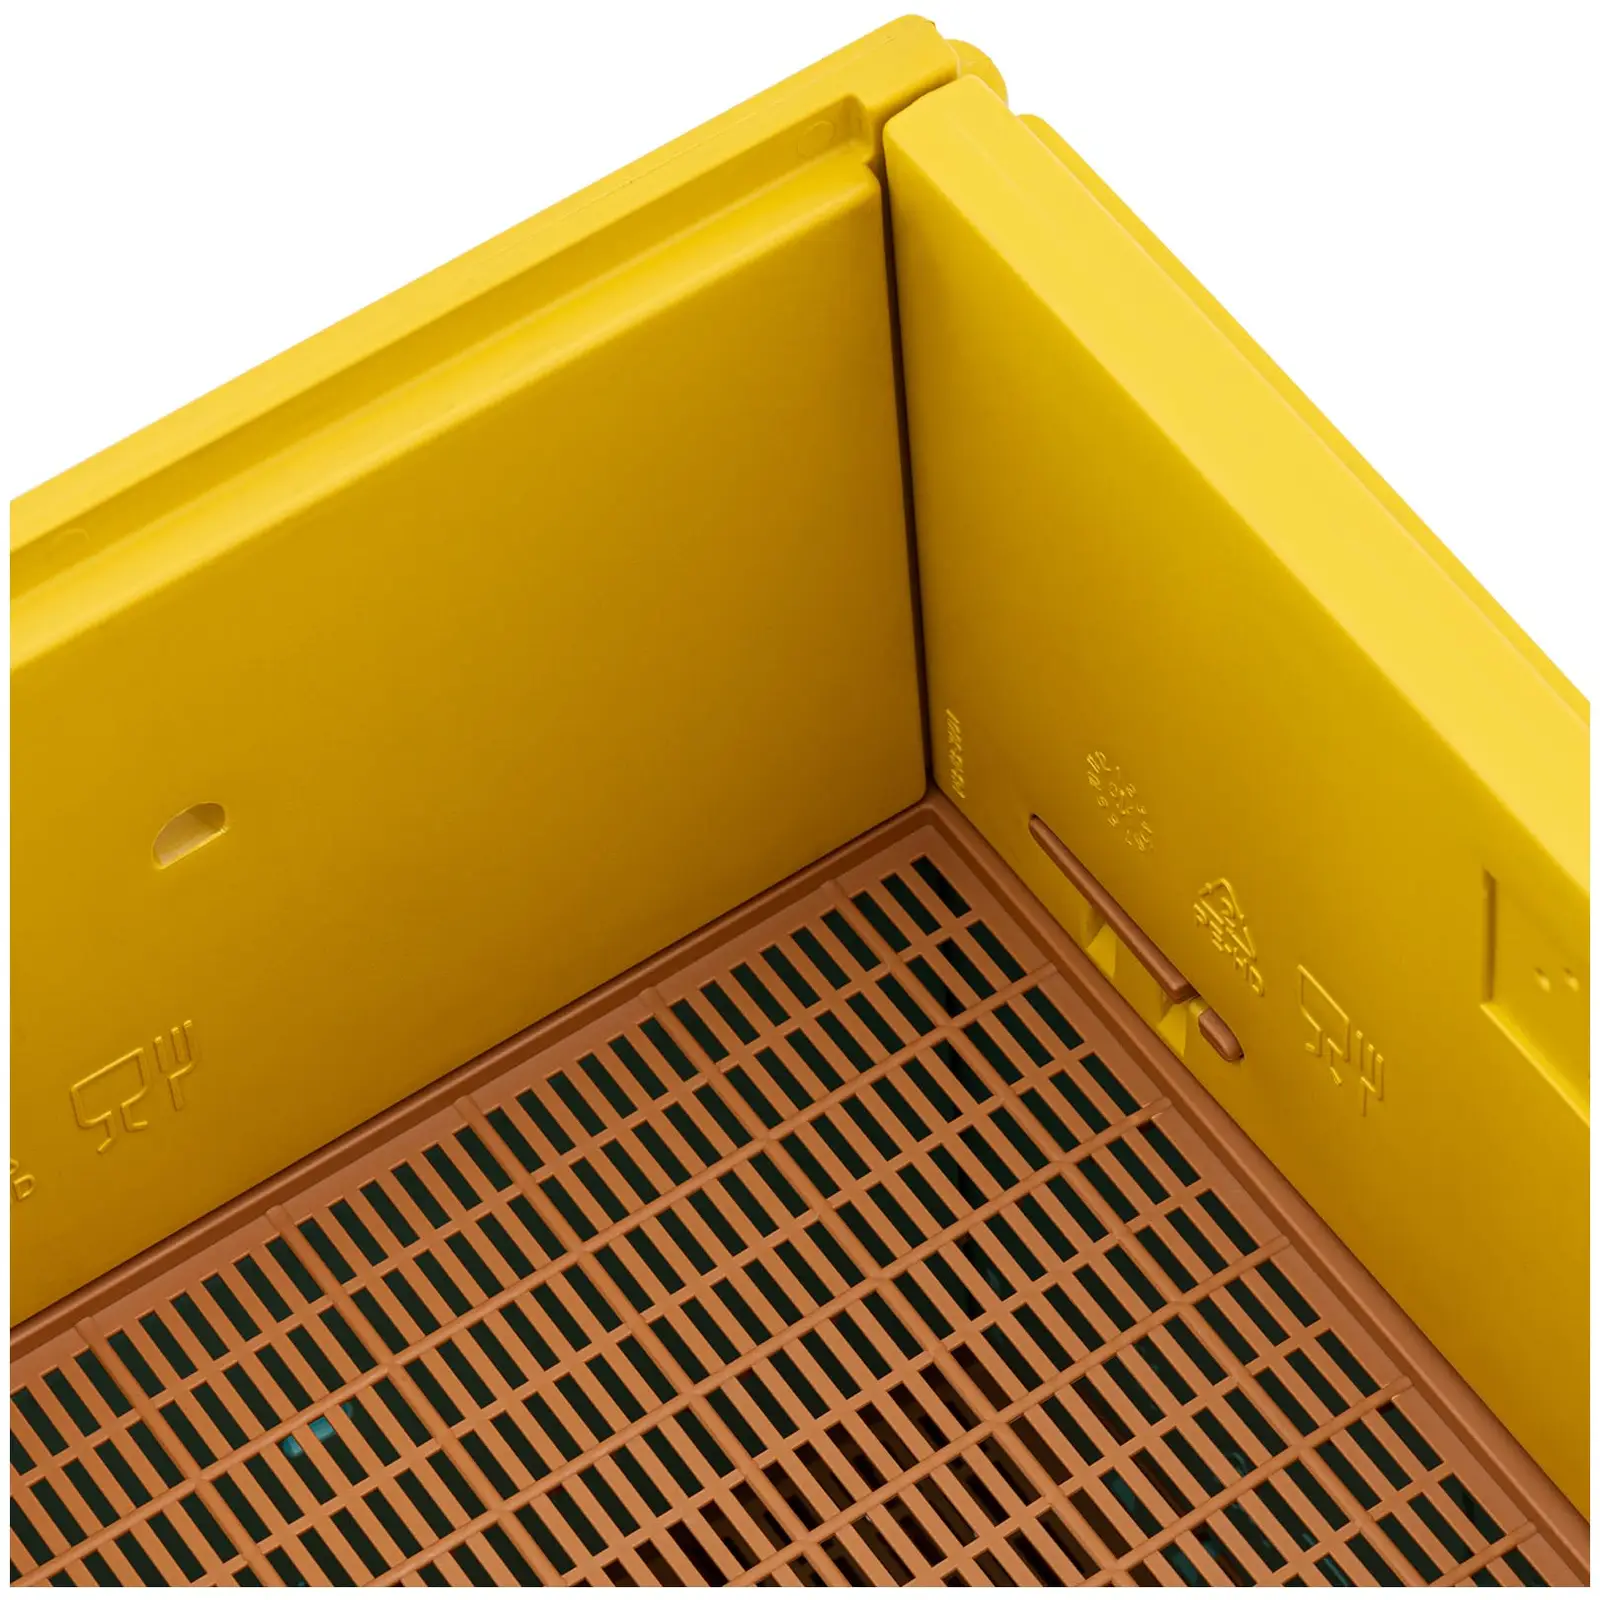 Beehive - plastic (polypropylene) - 54 x 44 cm - with thermal insulation